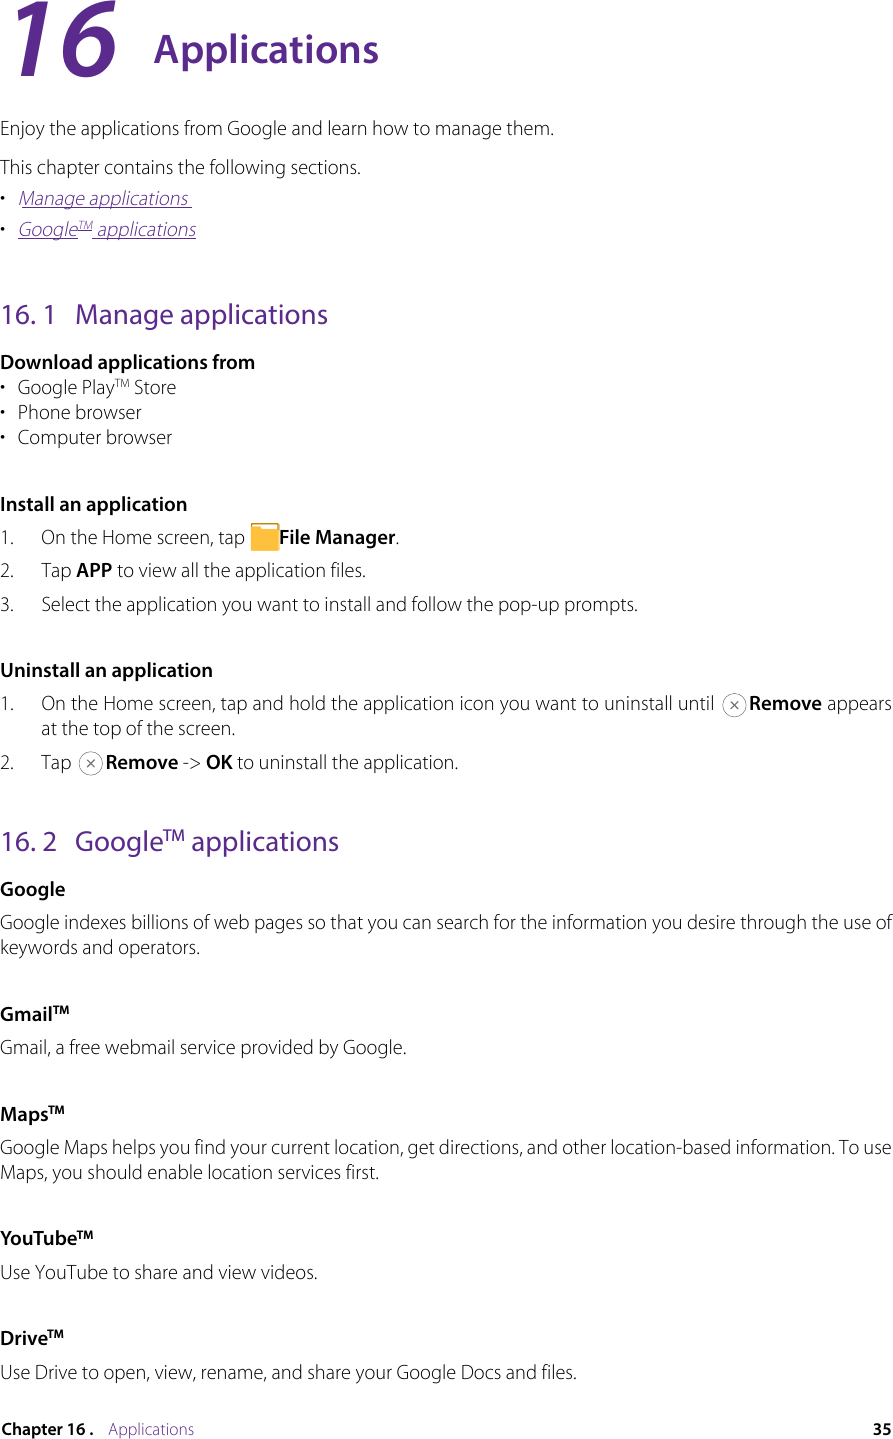 35Chapter 16 .    ApplicationsApplicationsEnjoy the applications from Google and learn how to manage them.This chapter contains the following sections.•  Manage applications•  GoogleTM applications16. 1  Manage applicationsDownload applications from•  Google PlayTM Store•  Phone browser•  Computer browserInstall an application1.  On the Home screen, tap  File Manager.2.  Tap APP to view all the application files.3.  Select the application you want to install and follow the pop-up prompts.Uninstall an application1.  On the Home screen, tap and hold the application icon you want to uninstall until  Remove appears at the top of the screen.2.  Tap  Remove -&gt; OK to uninstall the application.16. 2  GoogleTM applicationsGoogleGoogle indexes billions of web pages so that you can search for the information you desire through the use of keywords and operators. GmailTMGmail, a free webmail service provided by Google.MapsTMGoogle Maps helps you find your current location, get directions, and other location-based information. To use Maps, you should enable location services first.YouTubeTMUse YouTube to share and view videos.DriveTMUse Drive to open, view, rename, and share your Google Docs and files.16